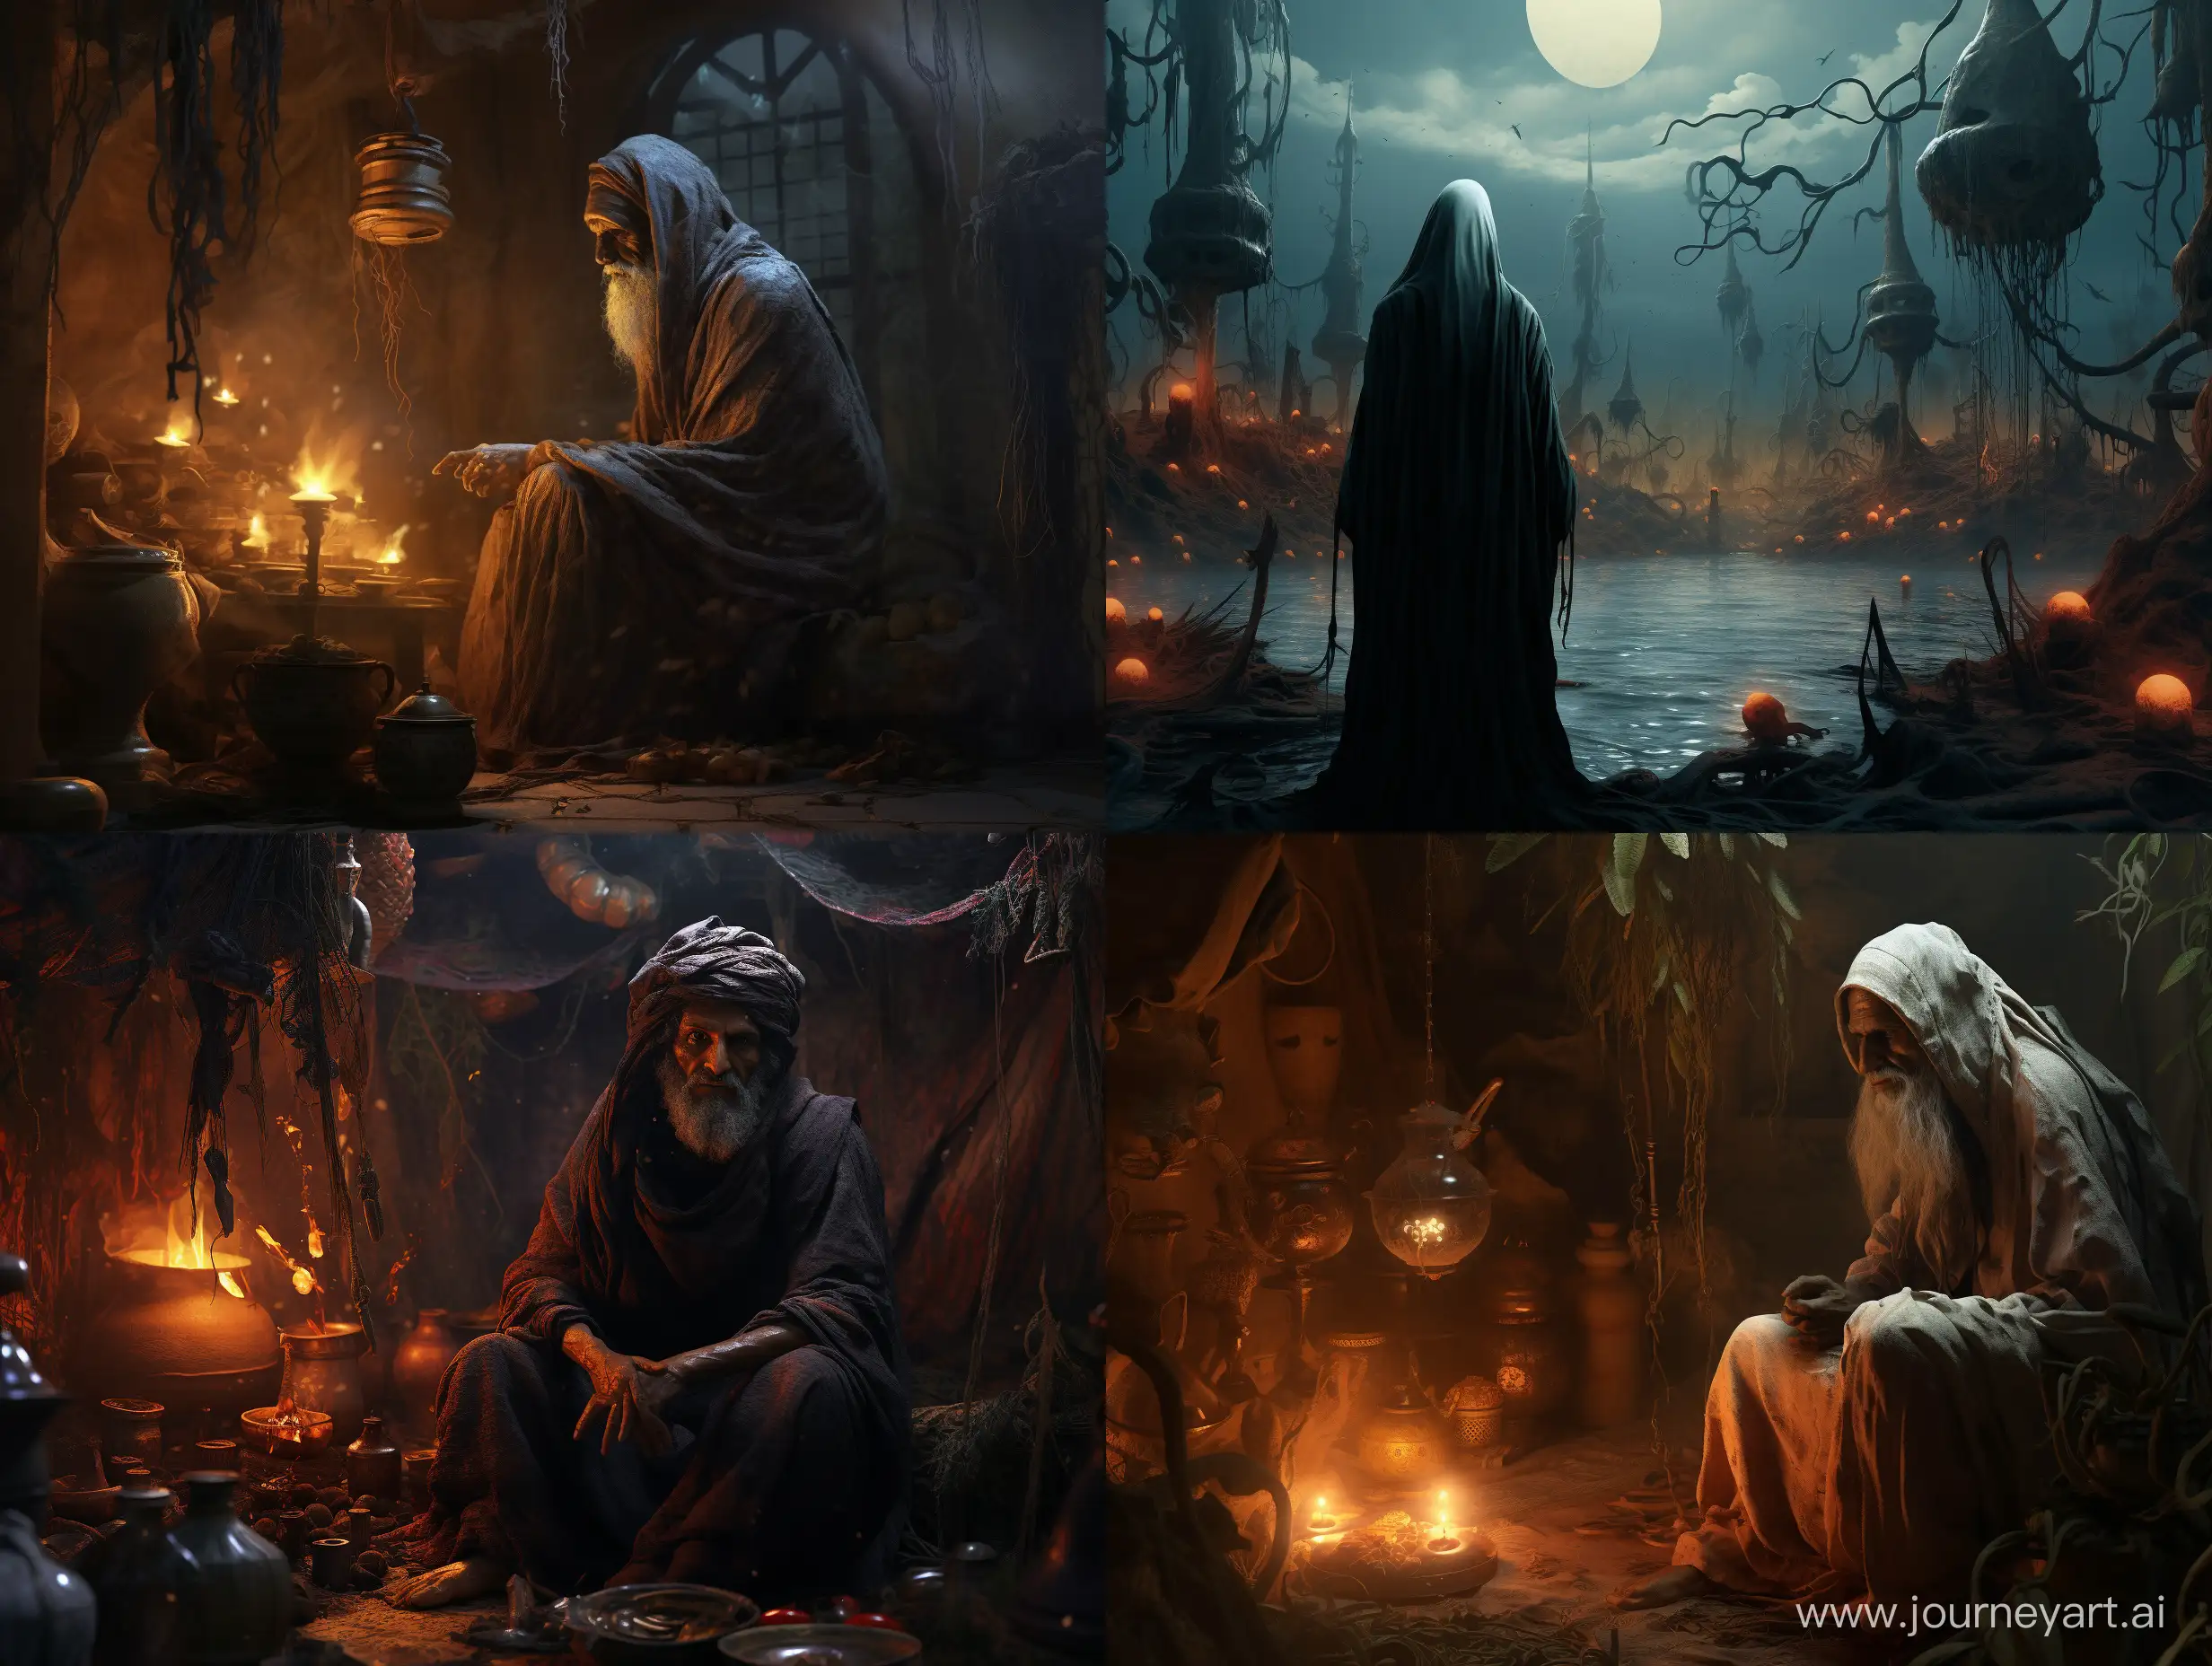 Illustration like a fairytale of the ugly witch man, Arabian atmosphere 